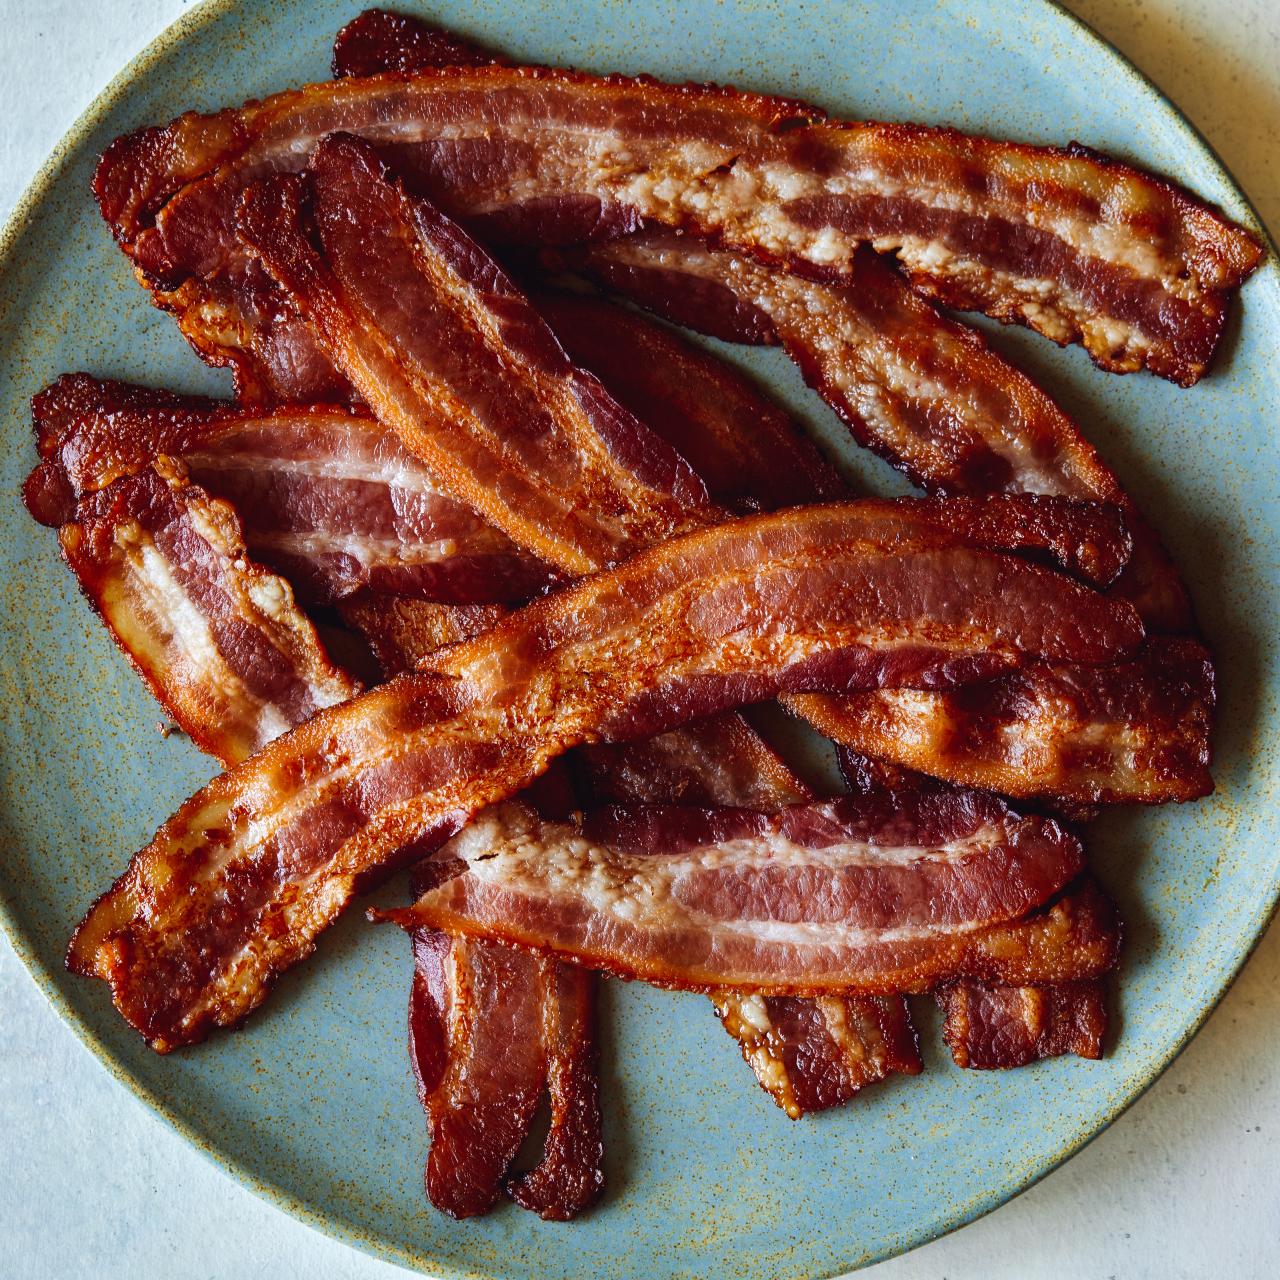 Oven Baked Bacon (The Easiest and Cleanest Way to Cook Bacon)